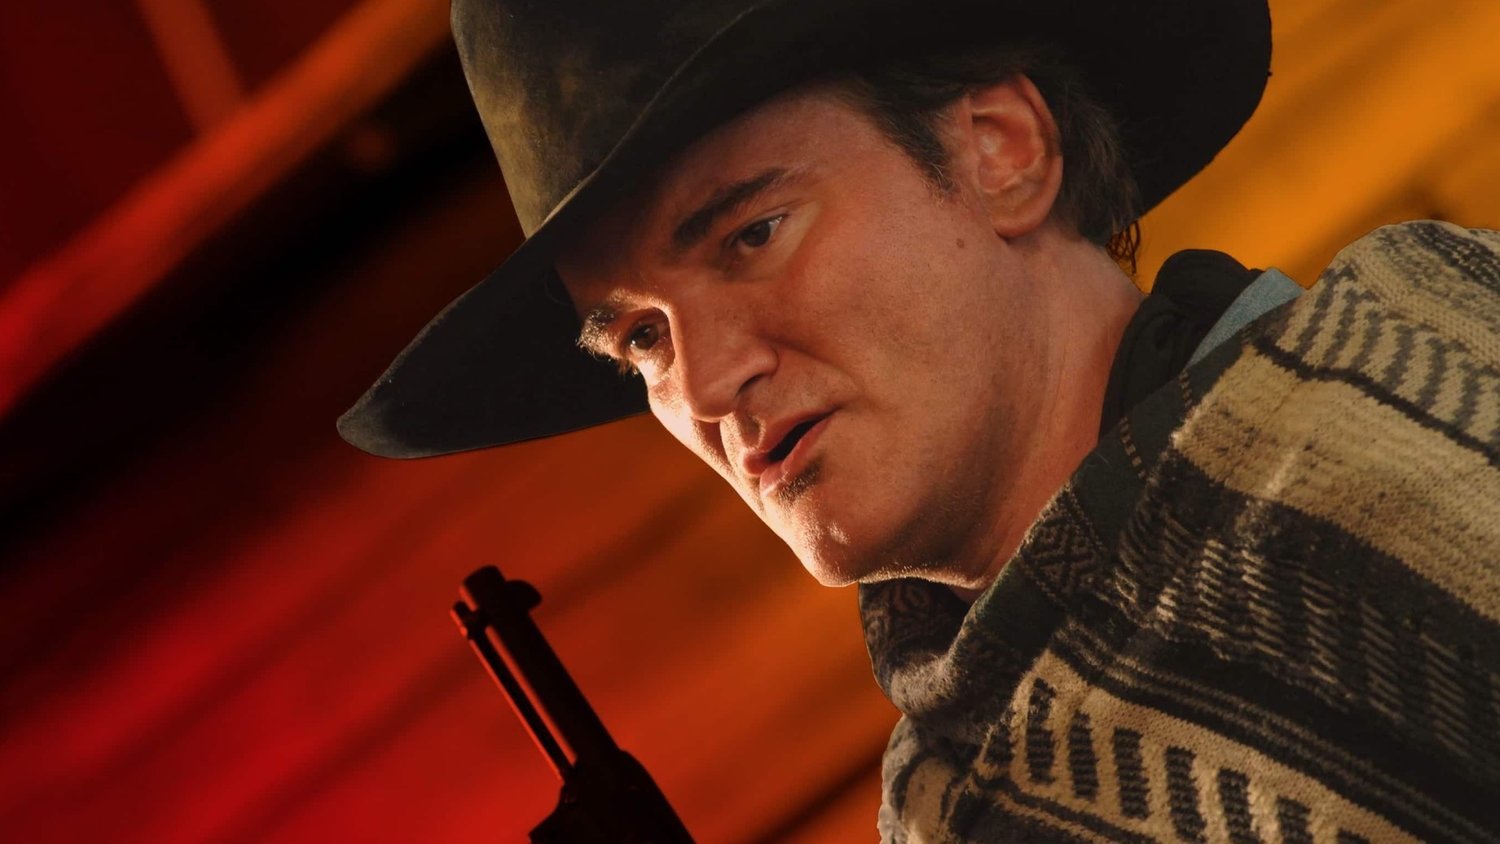 Quentin Tarantino’s tenth and final film is finally announced